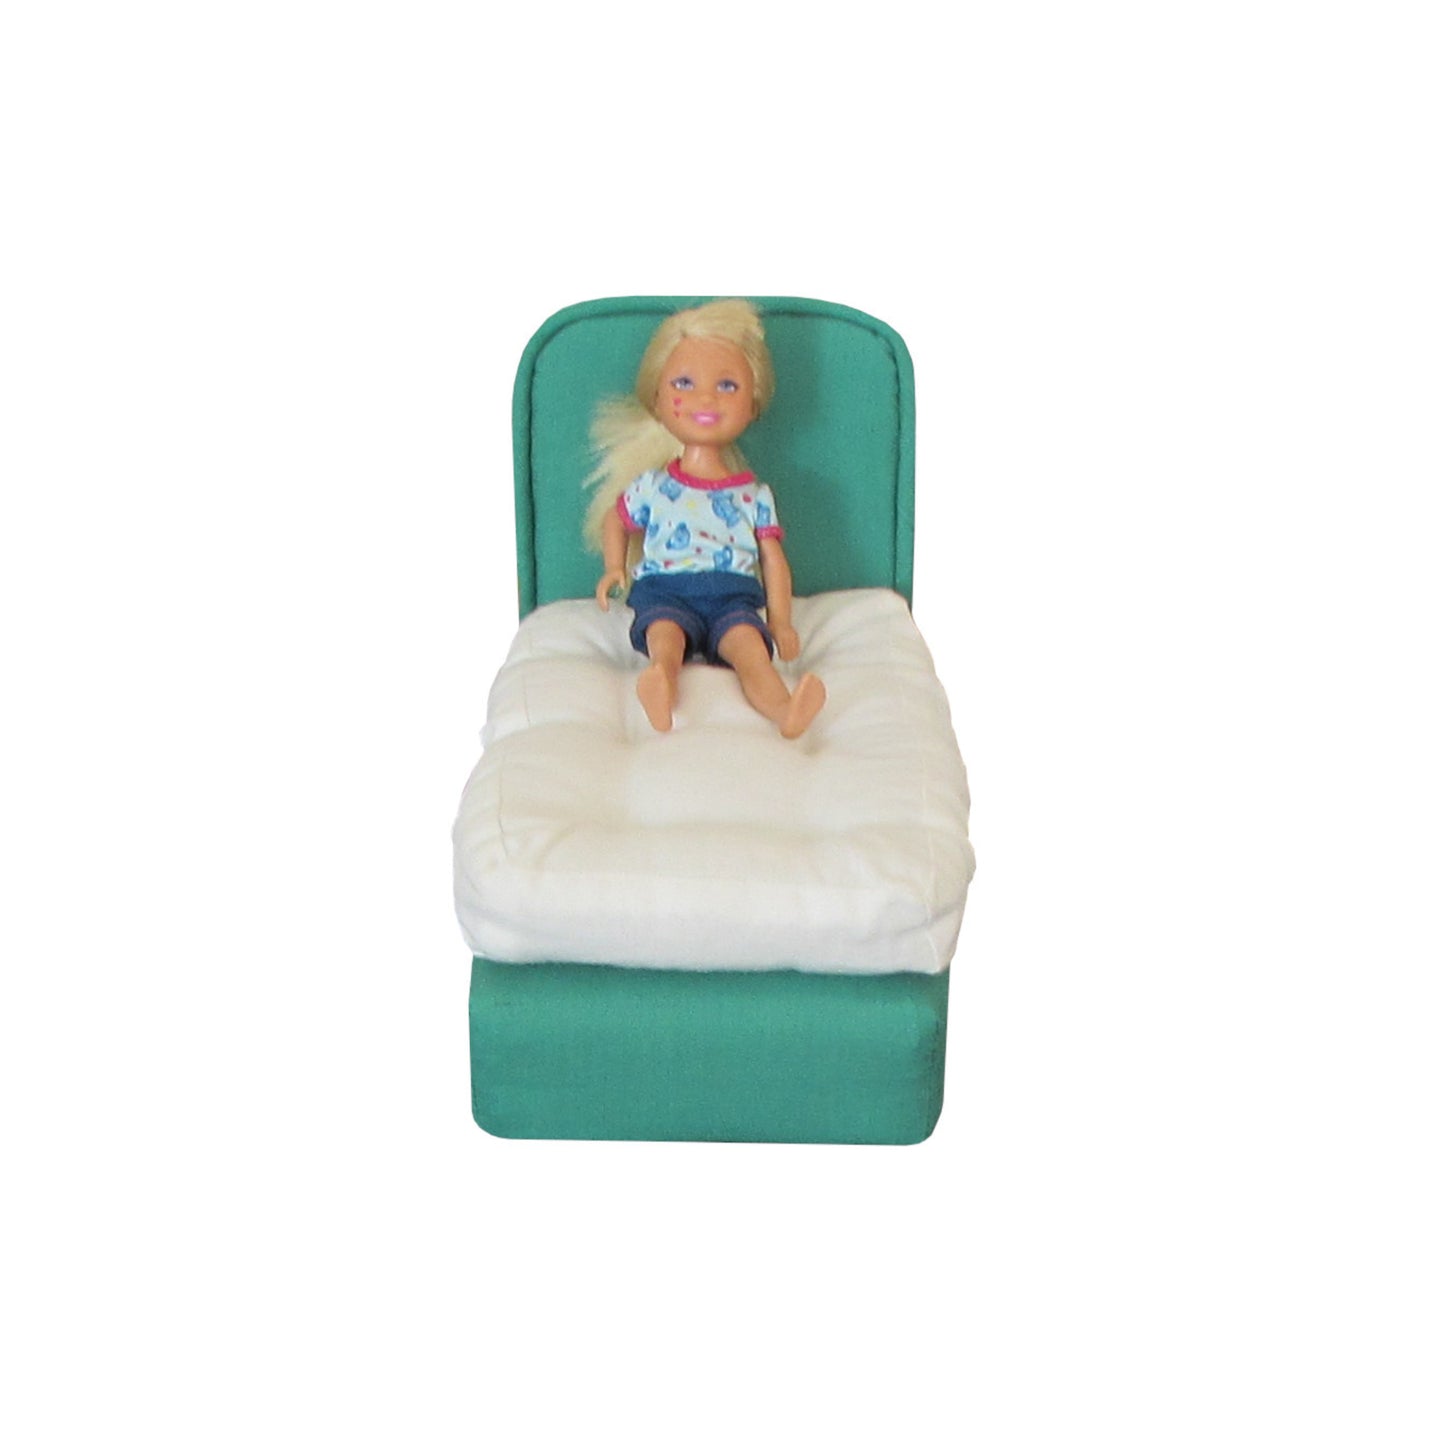 Upholstered Kelly Green Doll Bed for 6.5-inch dolls with doll